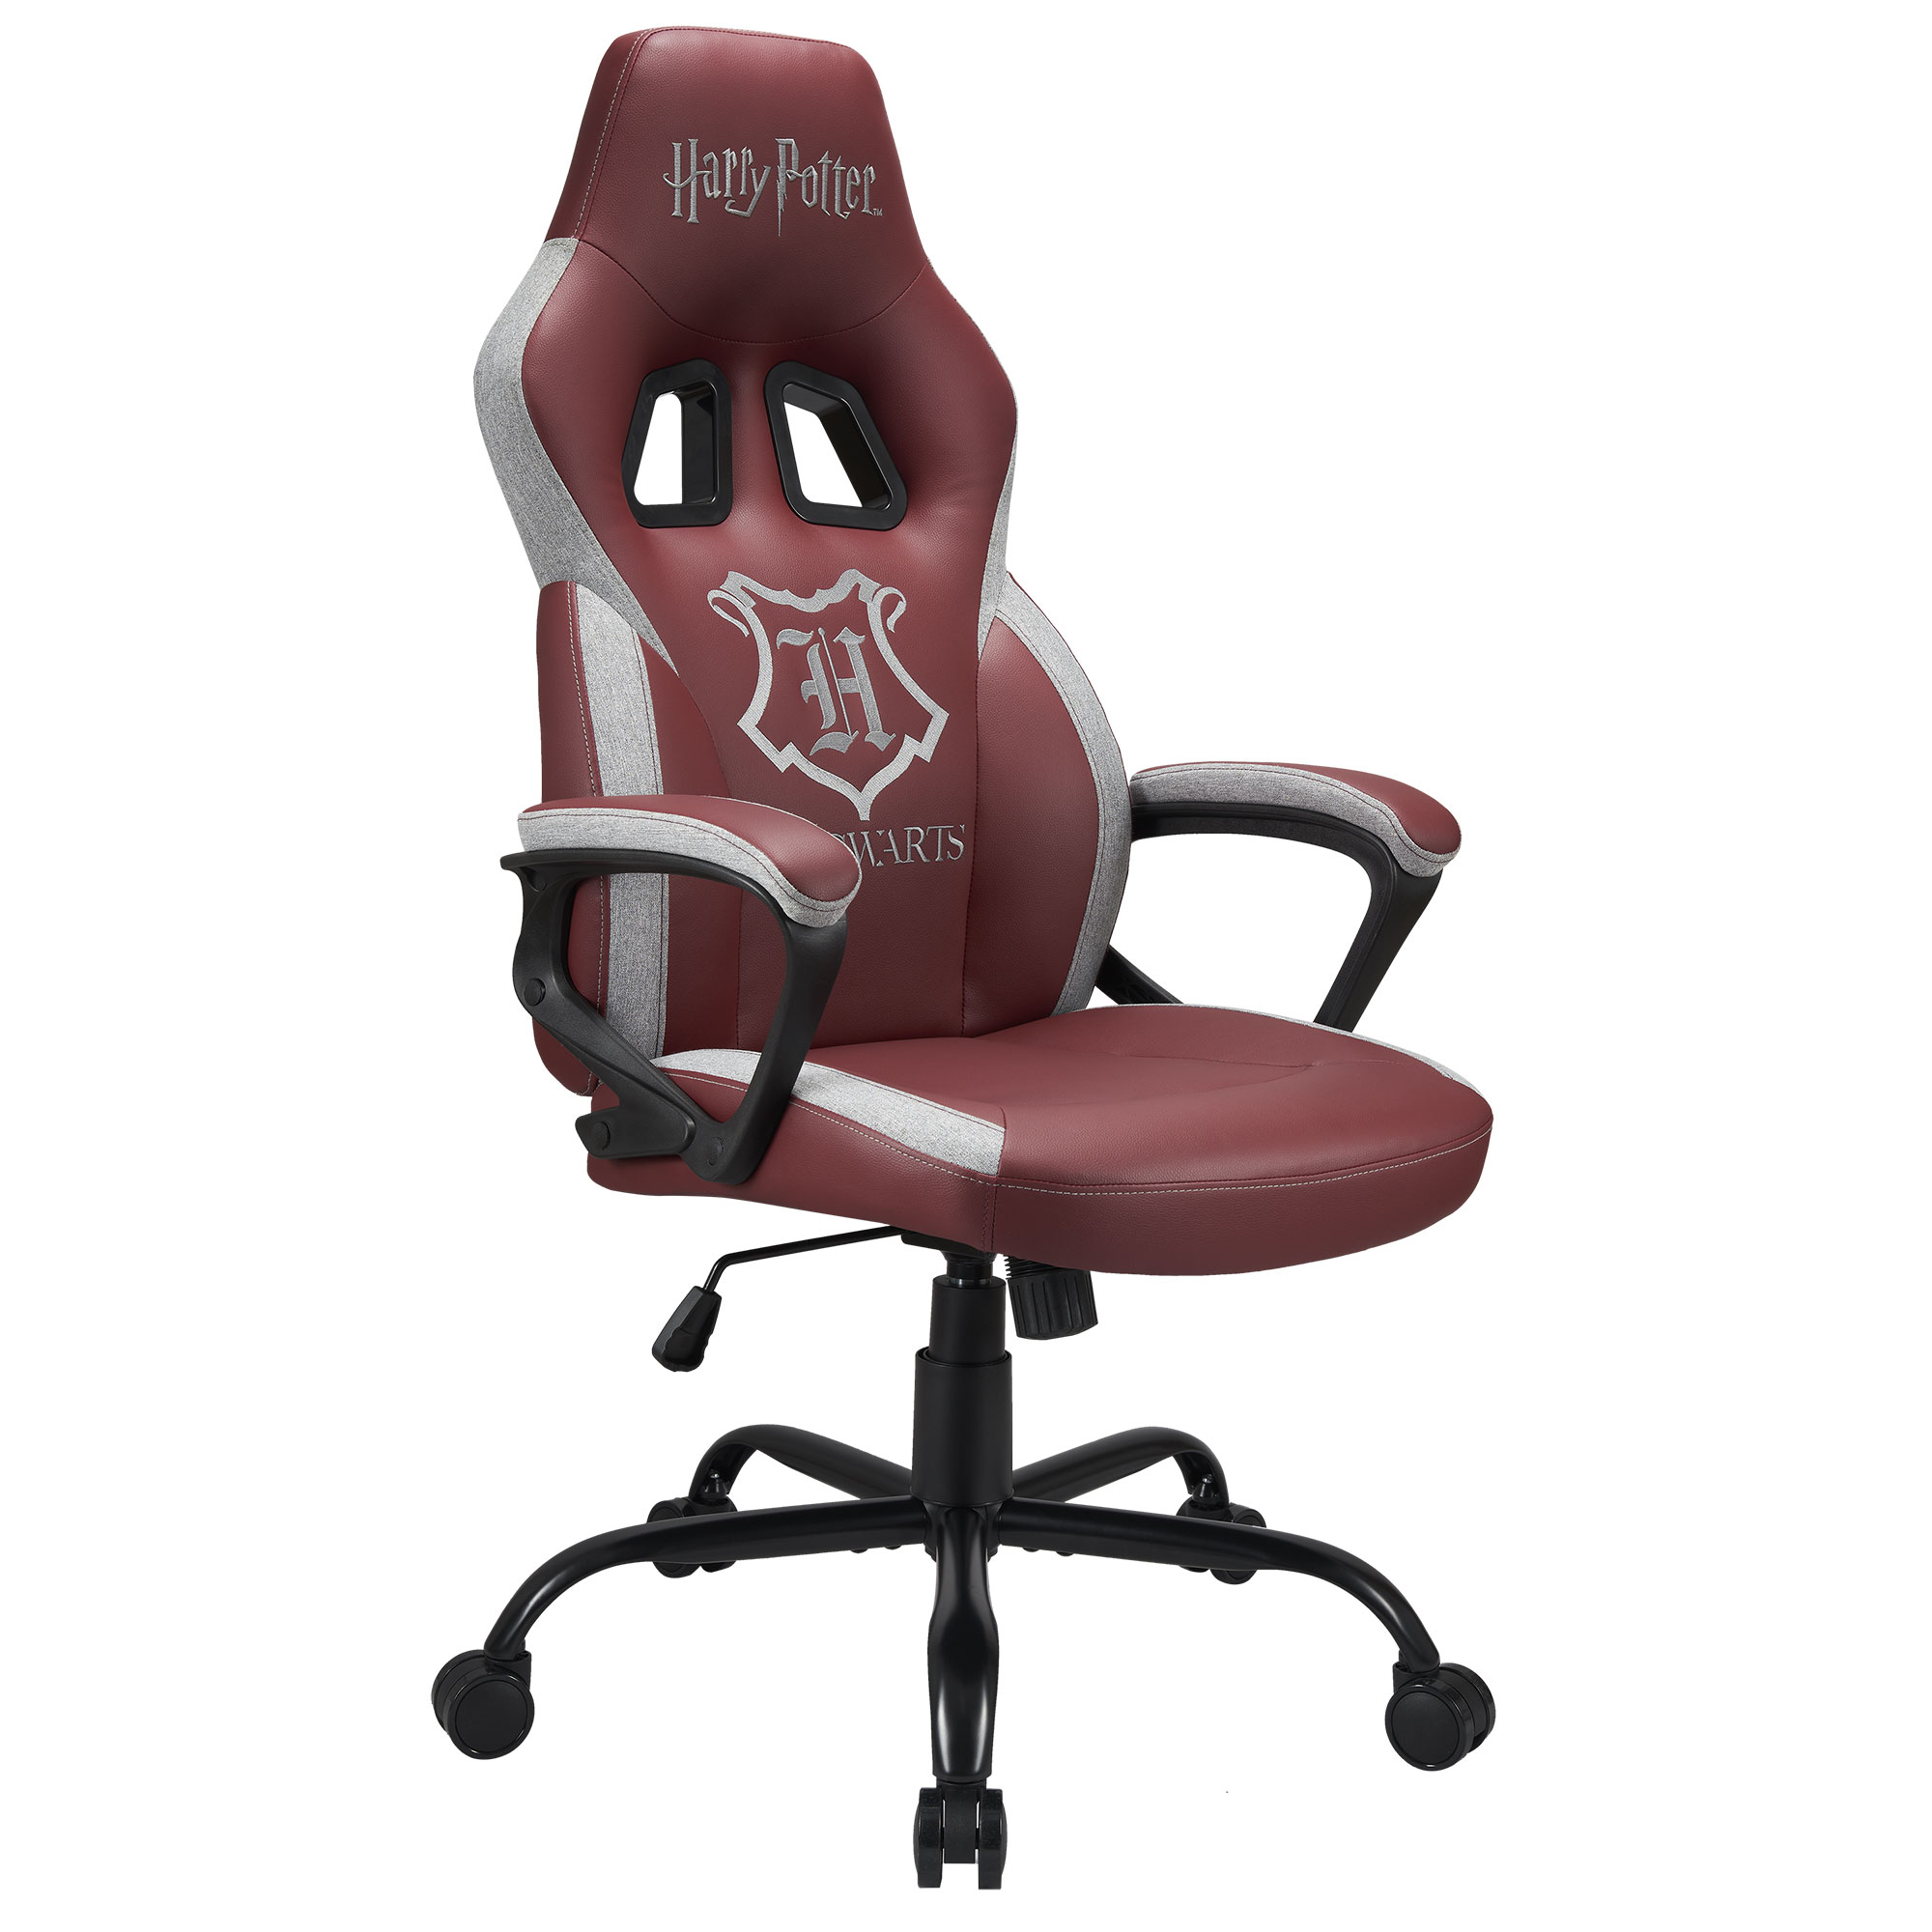 Chaise gaming Harry Potter - Hogwarts